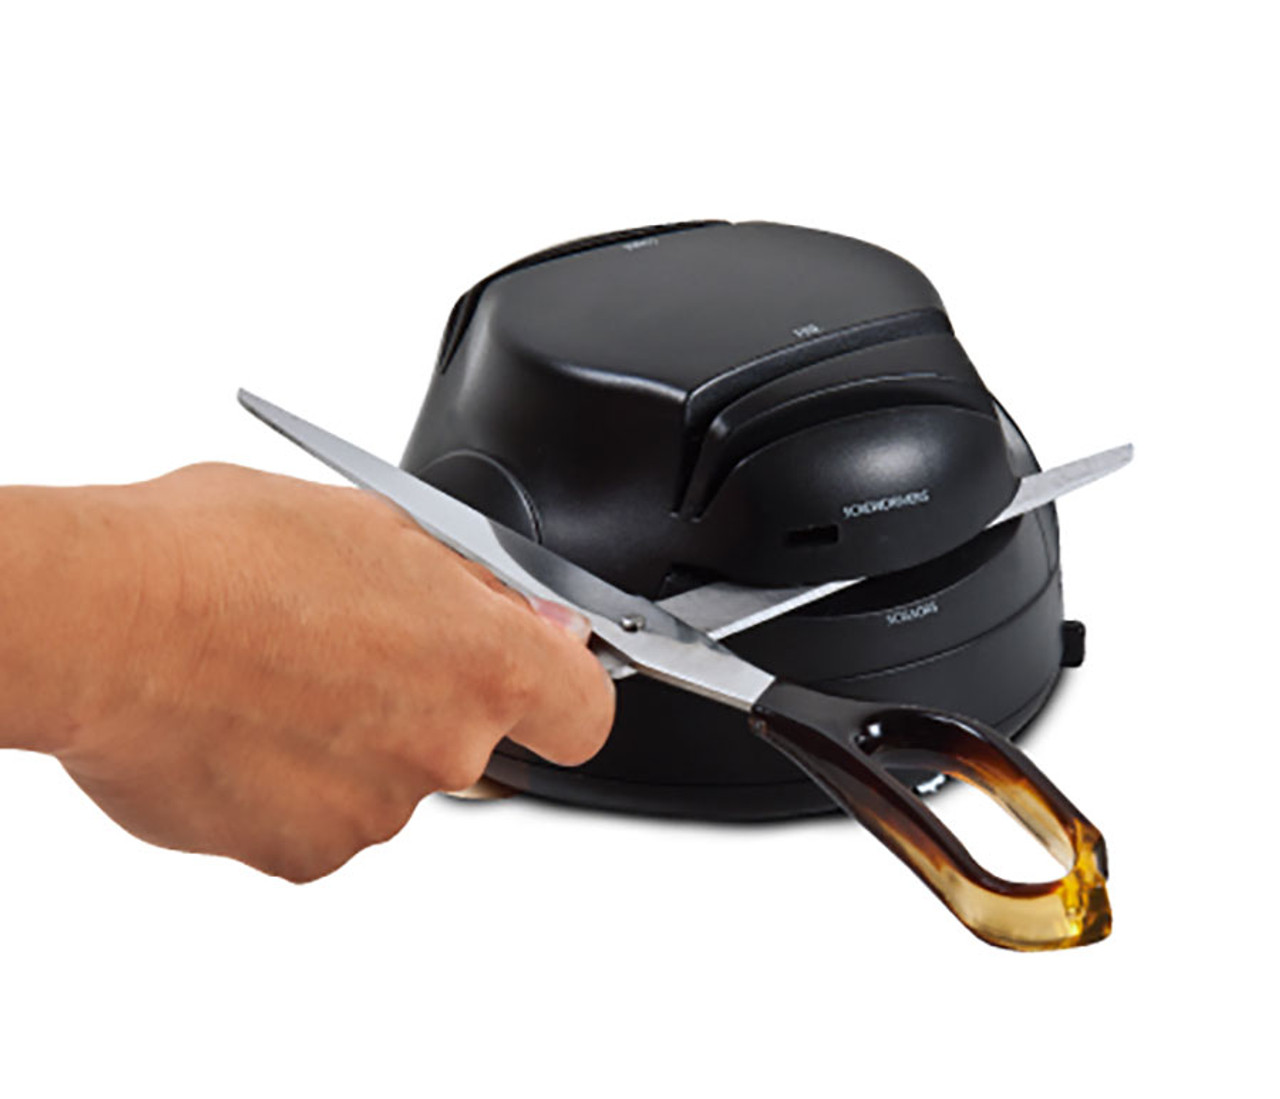 Brentwood Electric Knife & Tool Sharpener